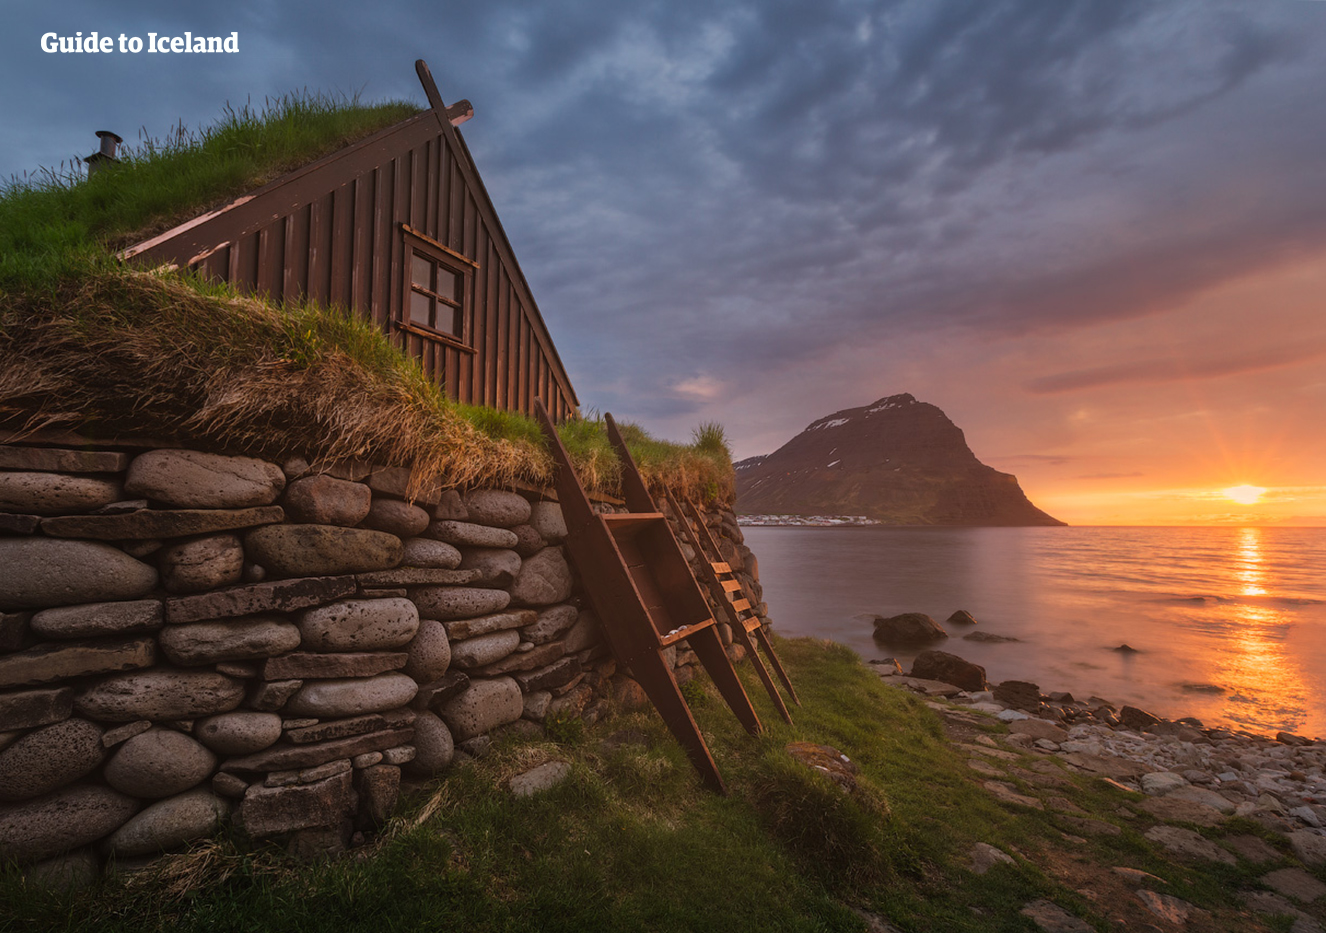 Old traditional turf house found in Bolungarvík, in Iceland's Westfjords.